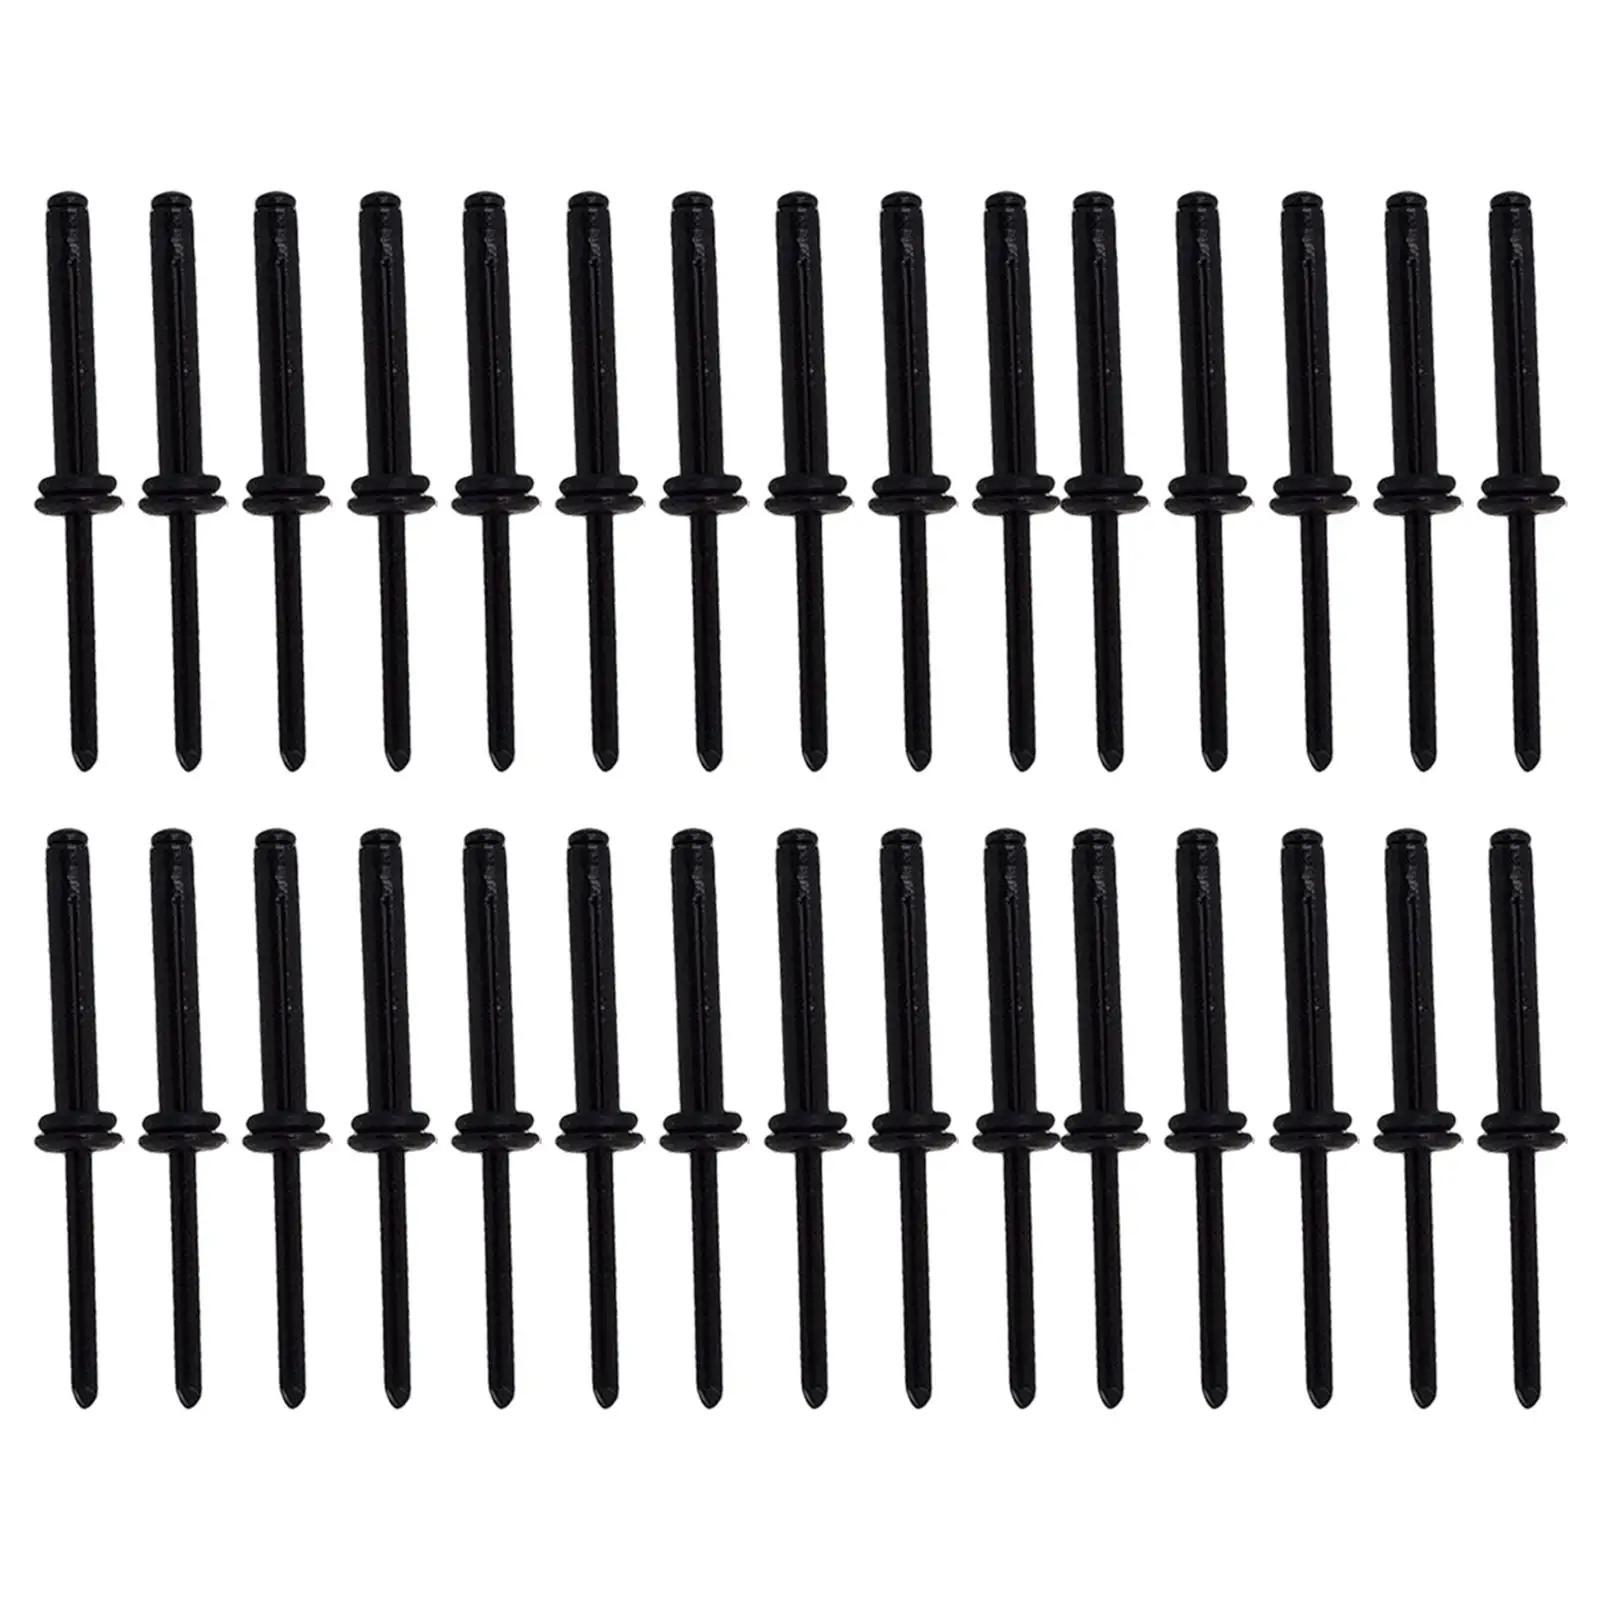 30Pcs  Rivets, Kayak Pad Eye Long Grip   Bulb Mounting Rivet with O Rings for Installing Kayak Canoe and Boat Accessories